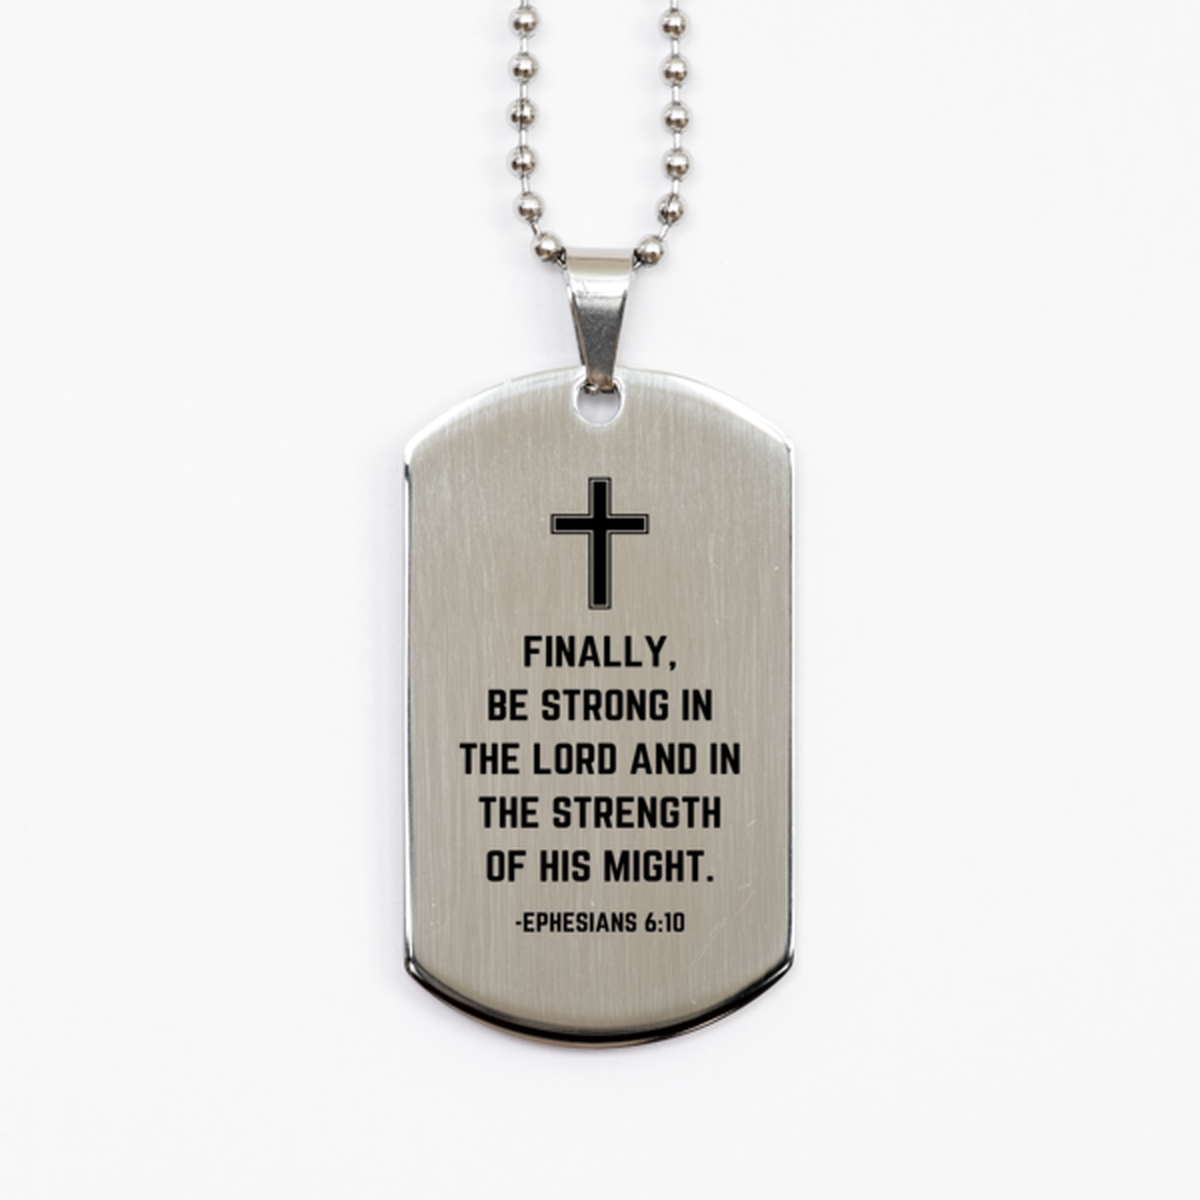 Baptism Gifts For Teenage Boys Girls, Christian Bible Verse Silver Dog Tag, Finally, be strong in the Lord Confirmation Gifts, Bible Verse Necklace for Son, Godson, Grandson, Nephew